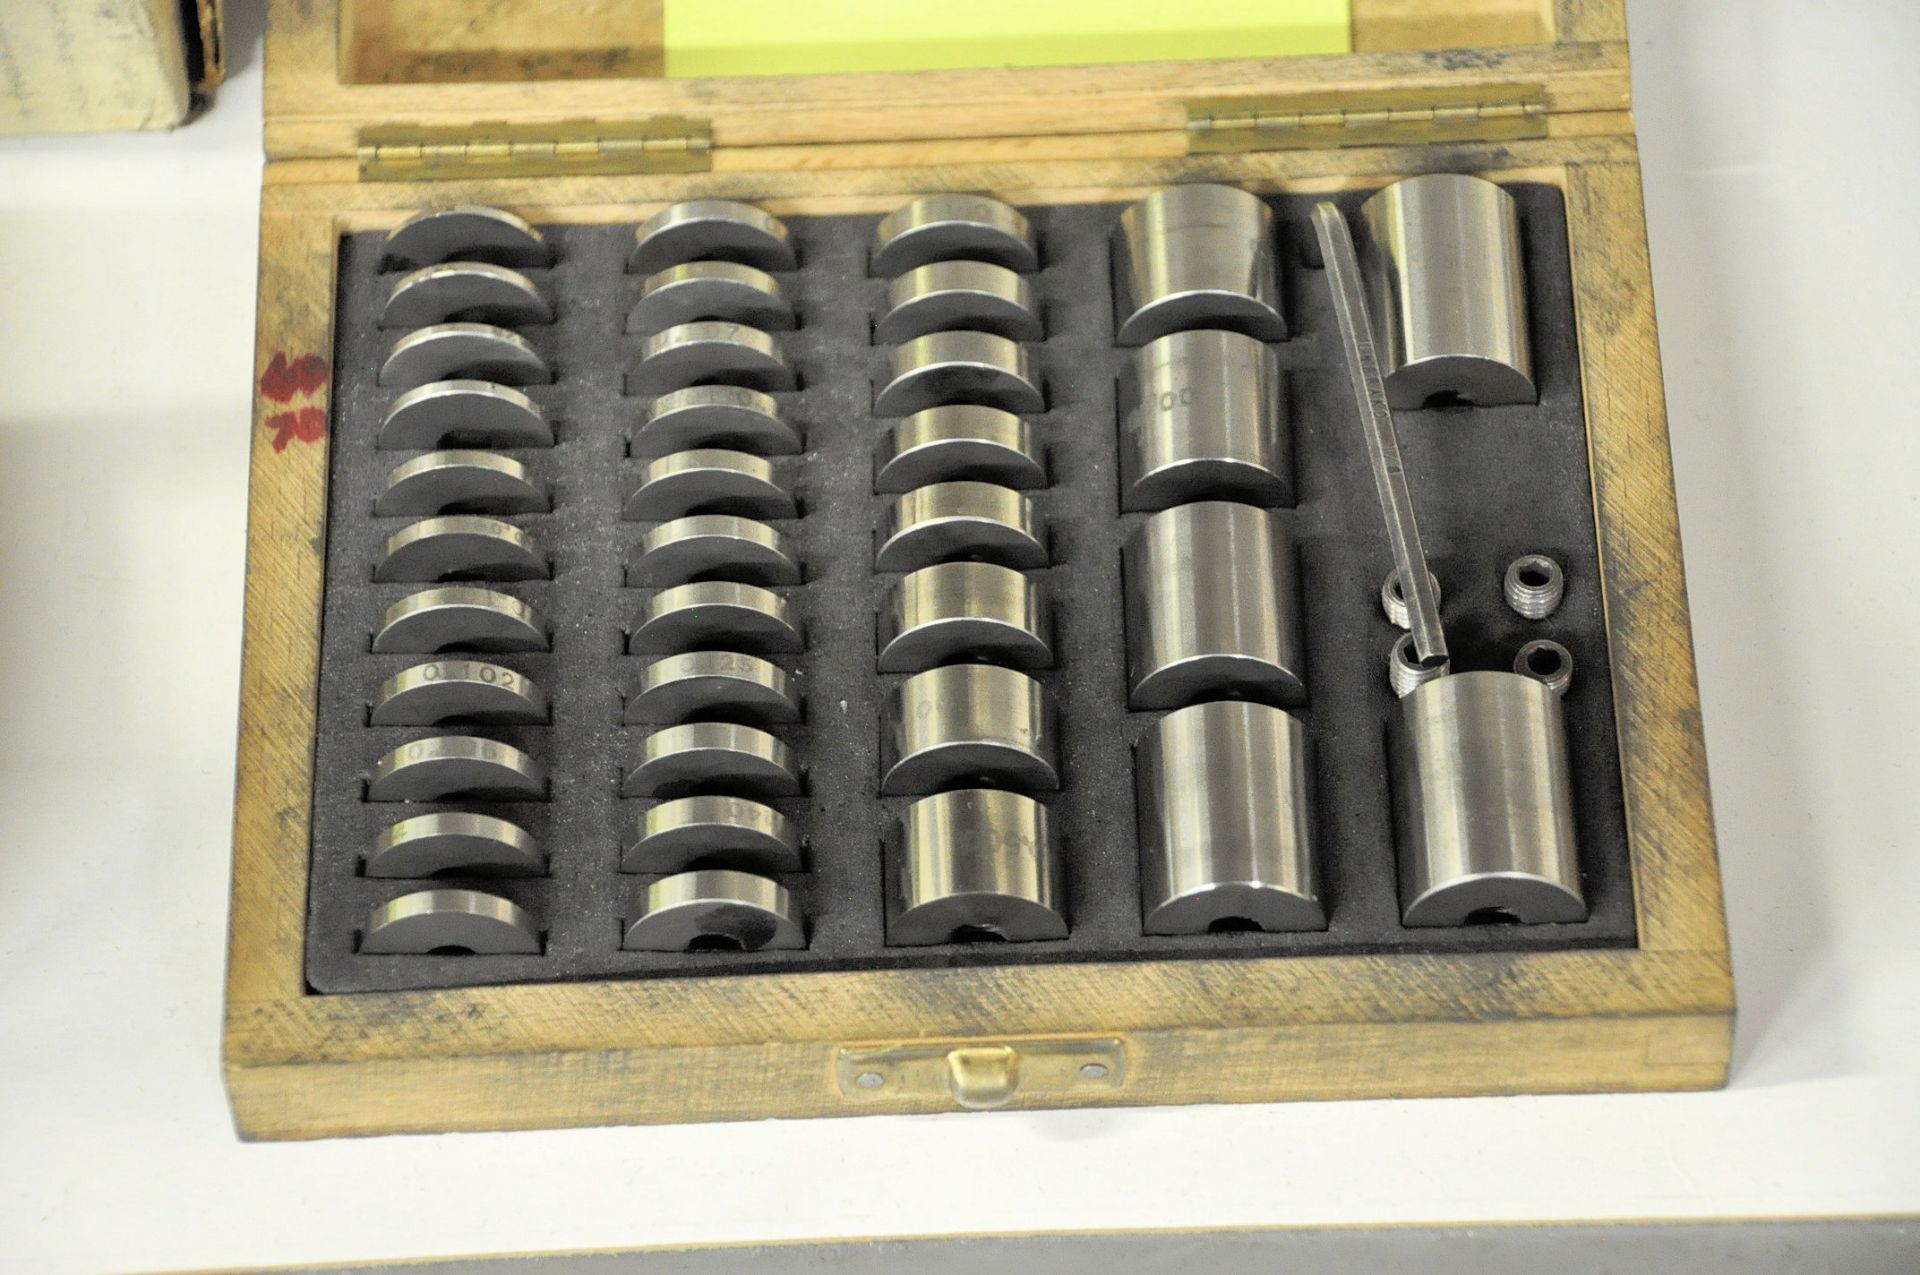 Lot-Various Gage Blocks in (2) Boxes and (1) Case on Lower Shelf - Image 3 of 4